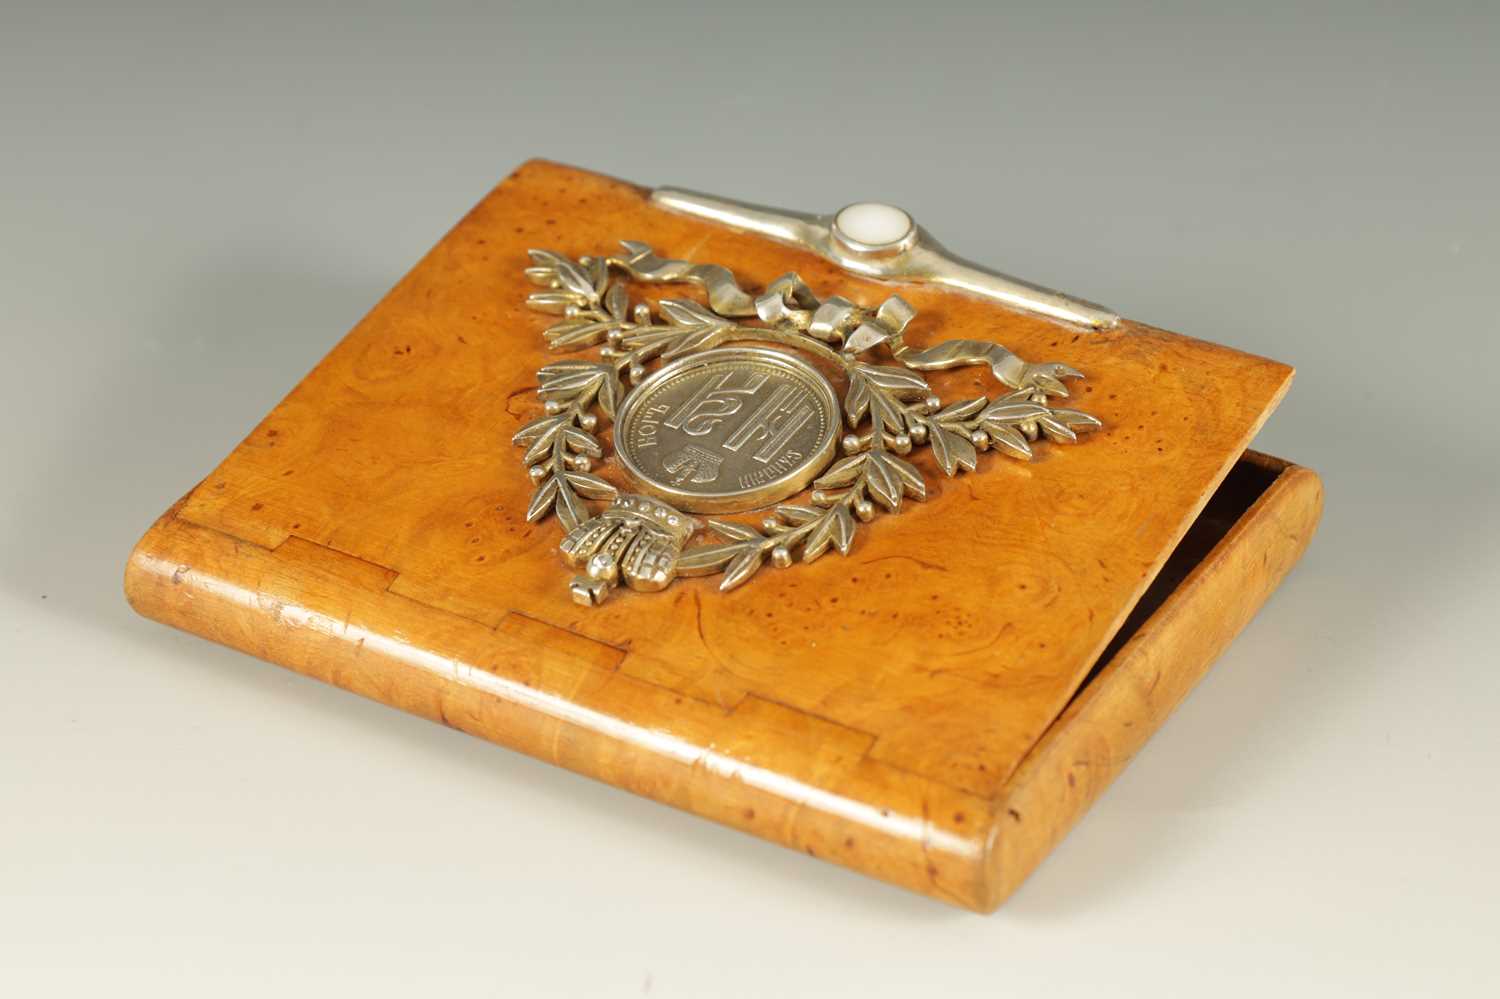 AN EARLY 20TH CENTURY FABERGE SILVER MOUNTED KARELIAN BIRCH CIGARETTE CASE - Image 4 of 10